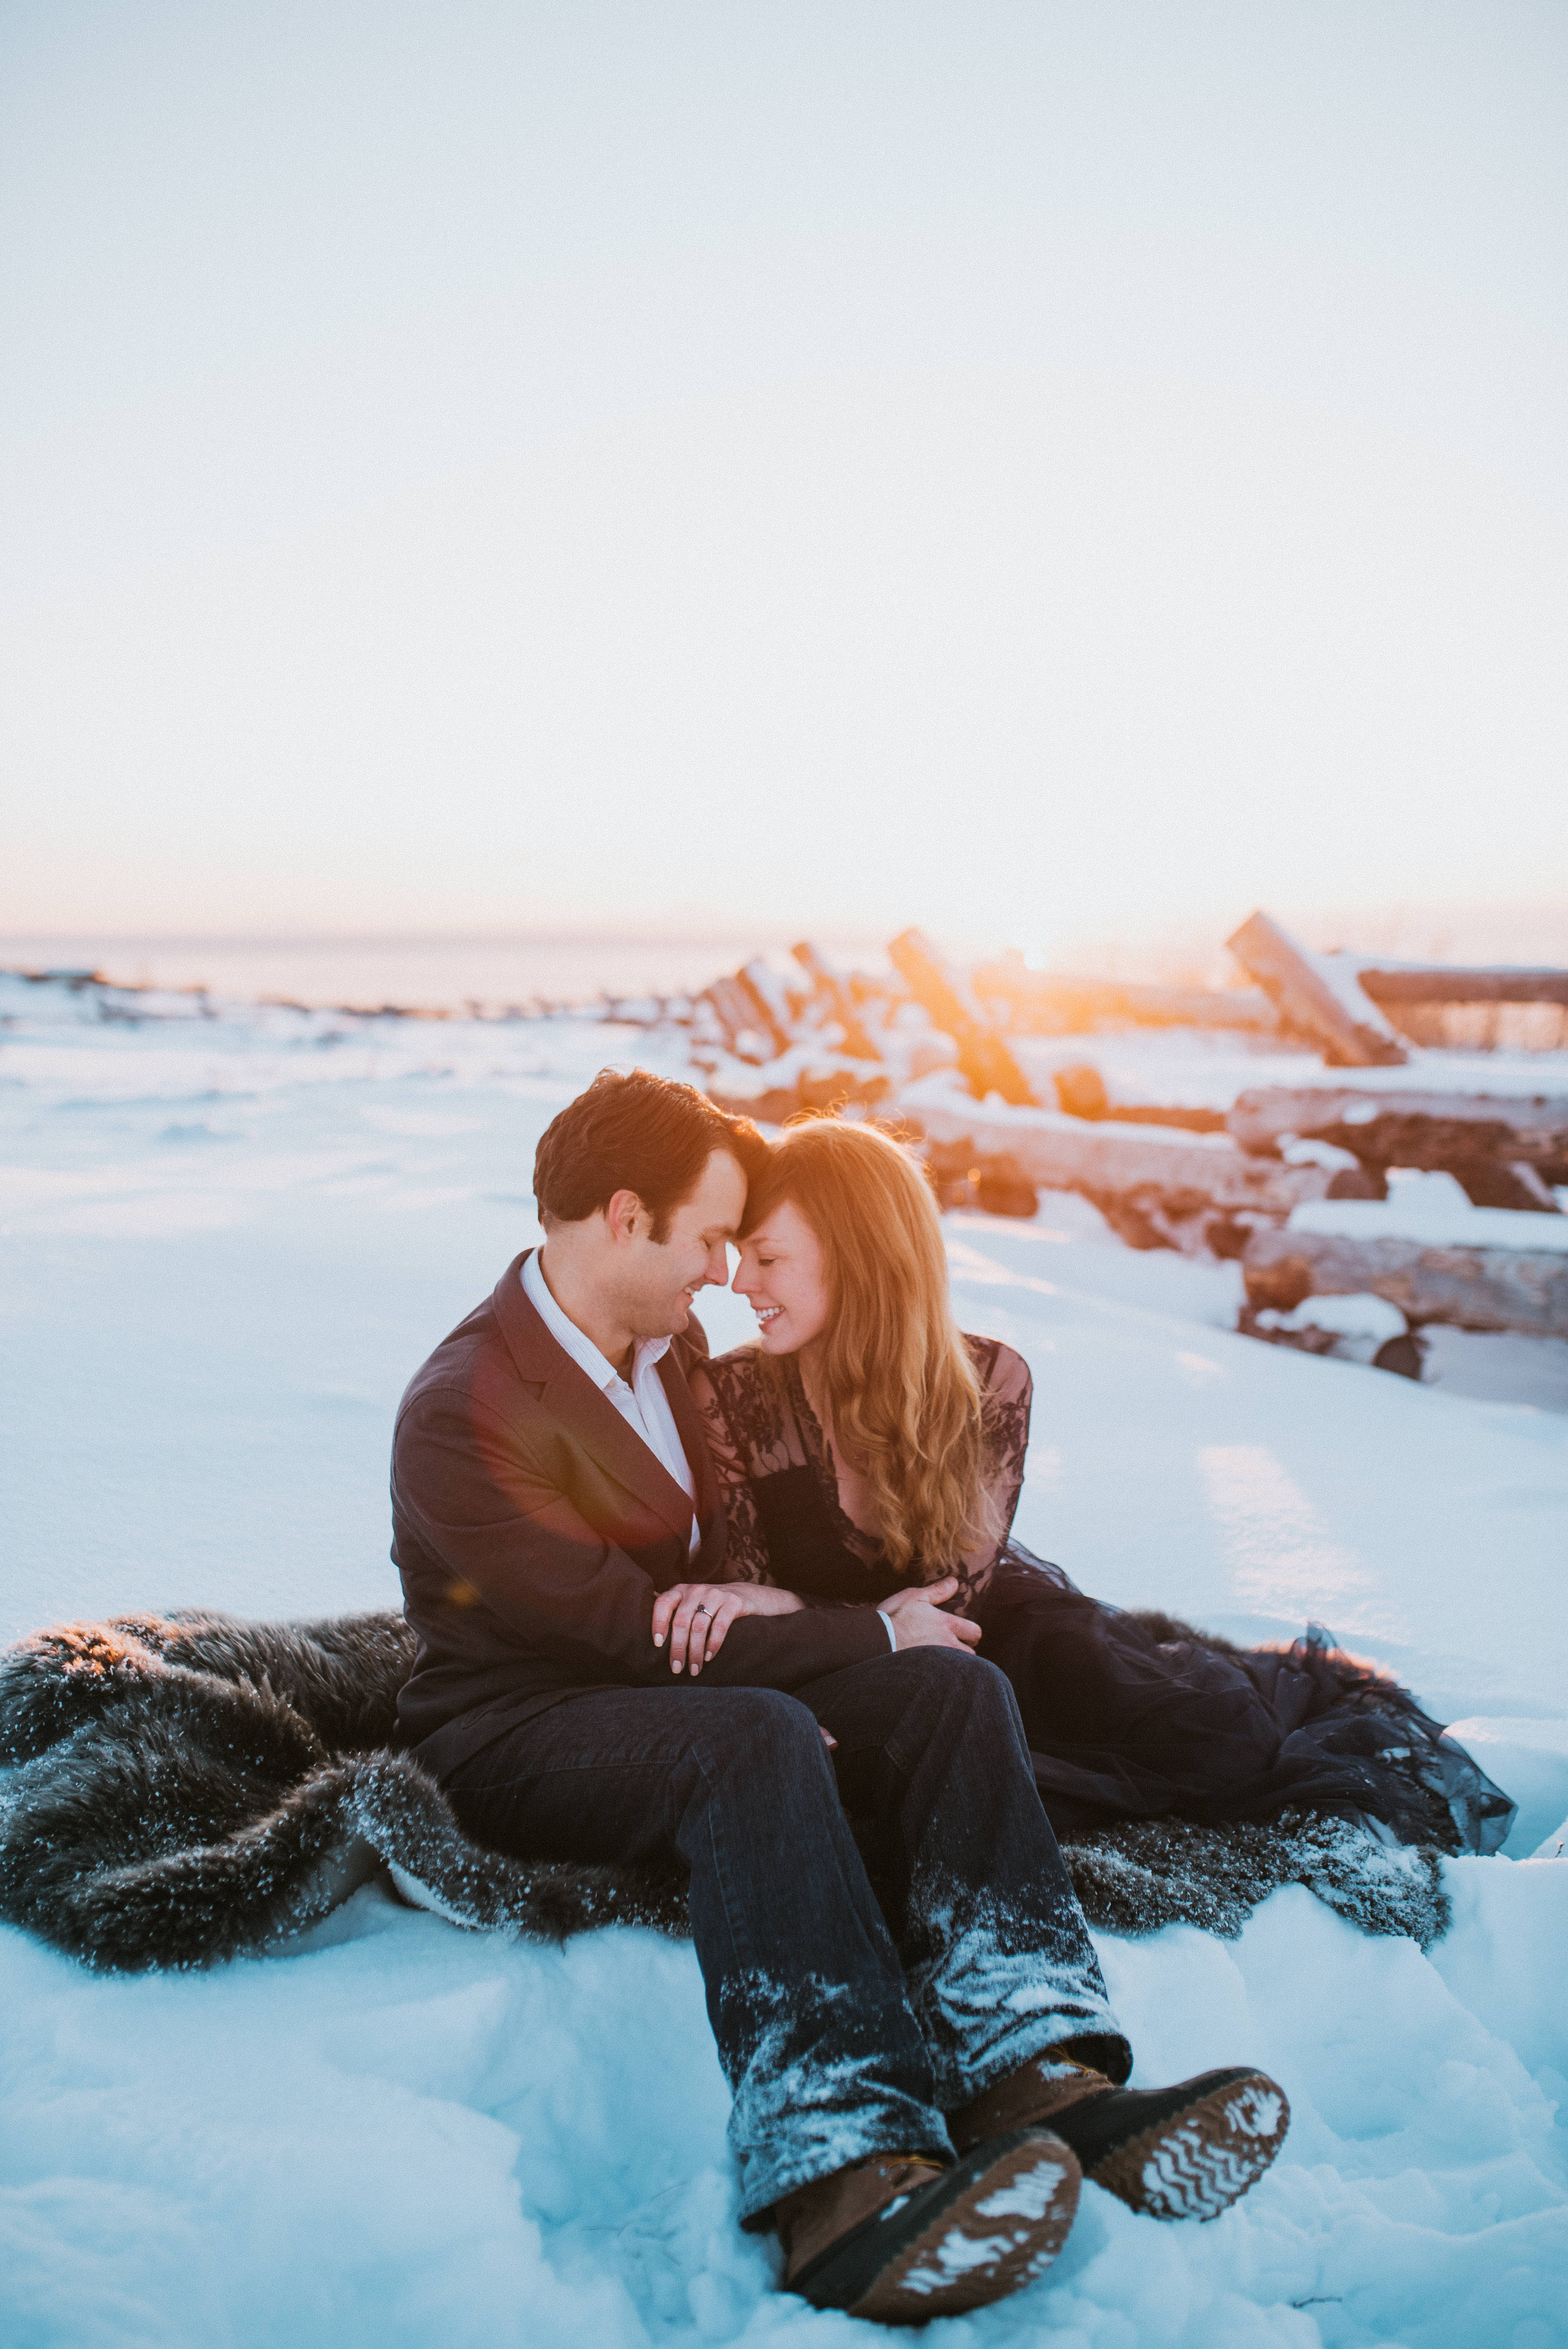 Couple sitting on fur rug snuggling with sunset light